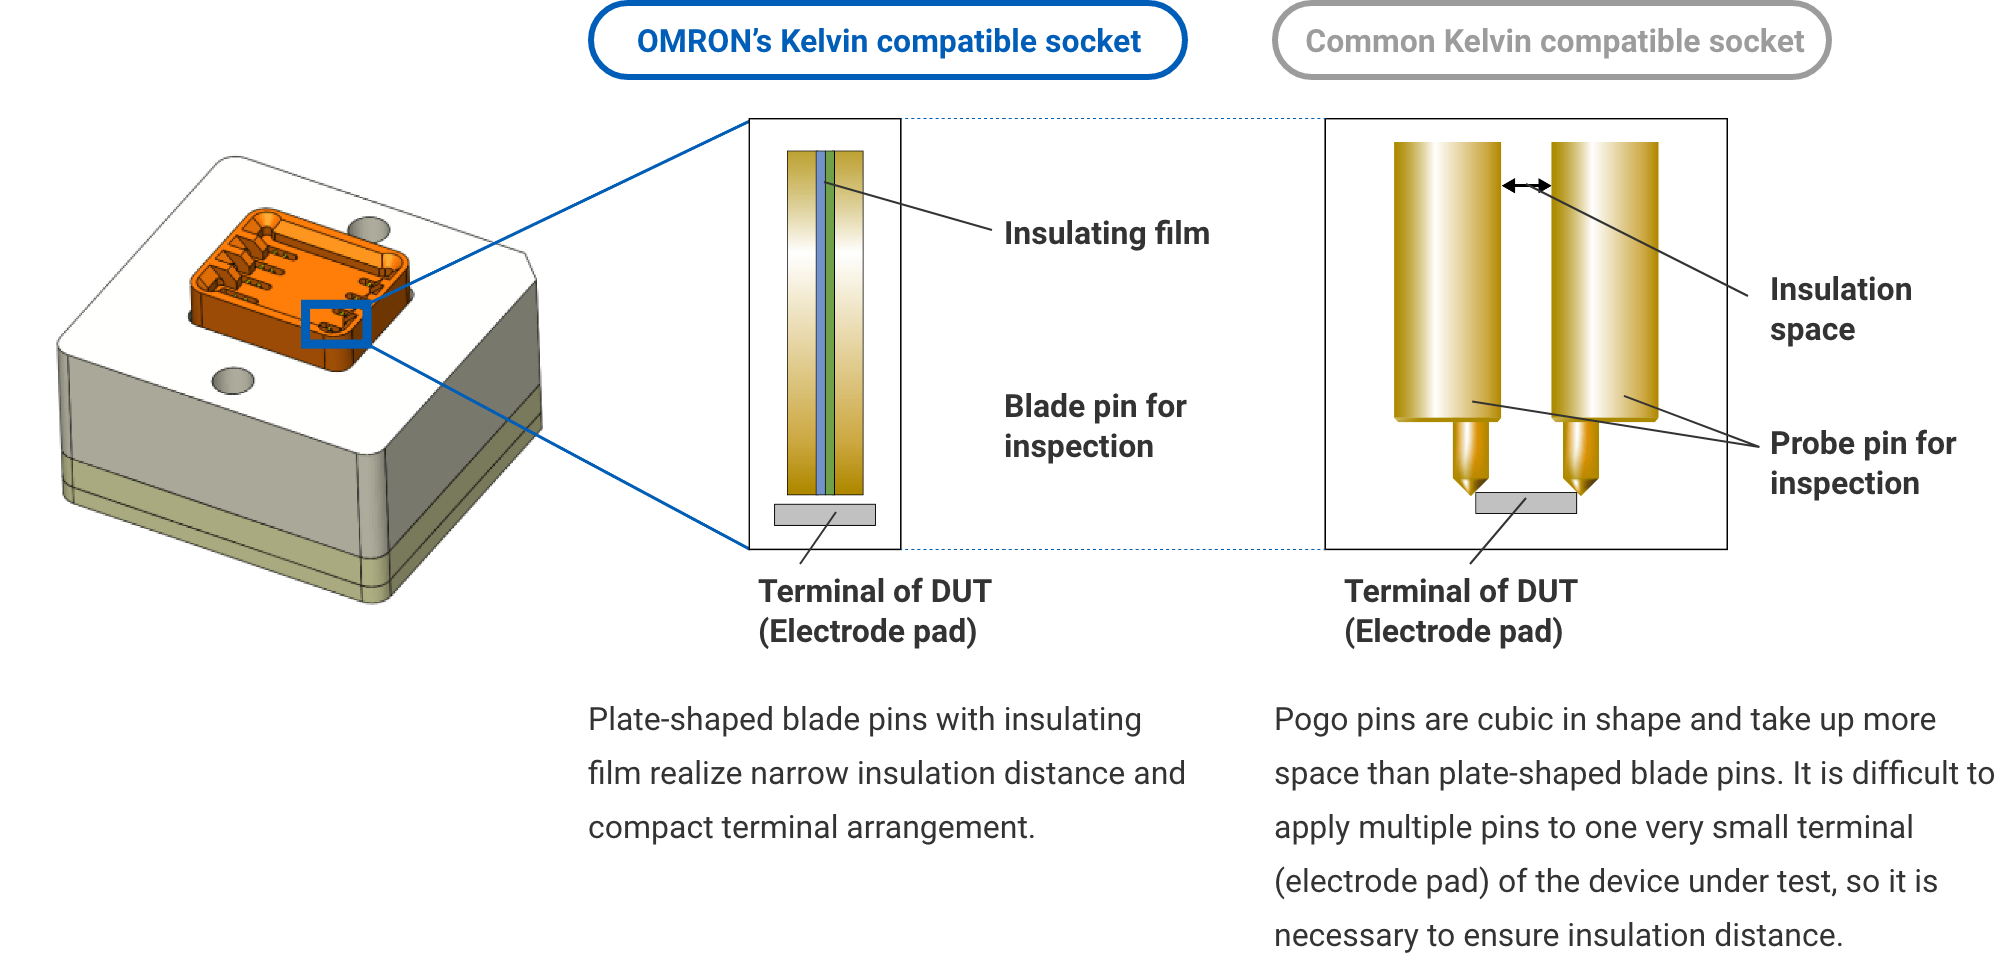 OMRON’s Kelvin compatible socket: Plate-shaped blade pins with insulating film realize narrow insulation distance and compact terminal arrangement. Common Kelvin compatible socket: Pogo pins are cubic in shape and take up more space than plate-shaped blade pins. It is difficult to apply multiple pins to one very small terminal (electrode pad) of the device under test, so it is necessary to ensure insulation distance.